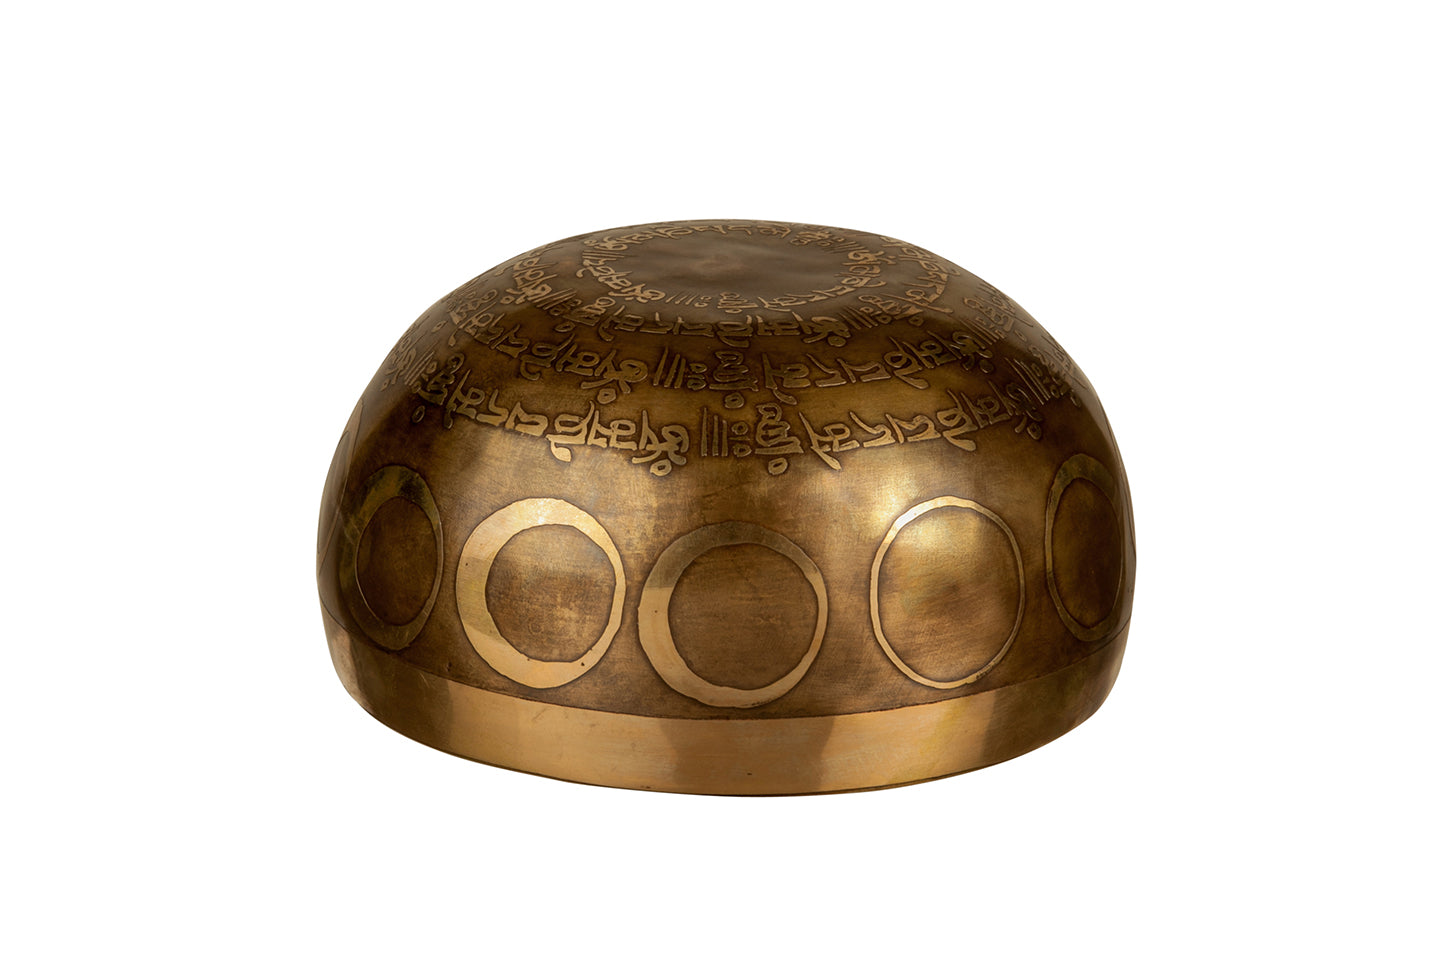 The Inner Space Bowl: 6 Inch Handmade Bronze Singing Bowl From Nepal Moon and Star Design